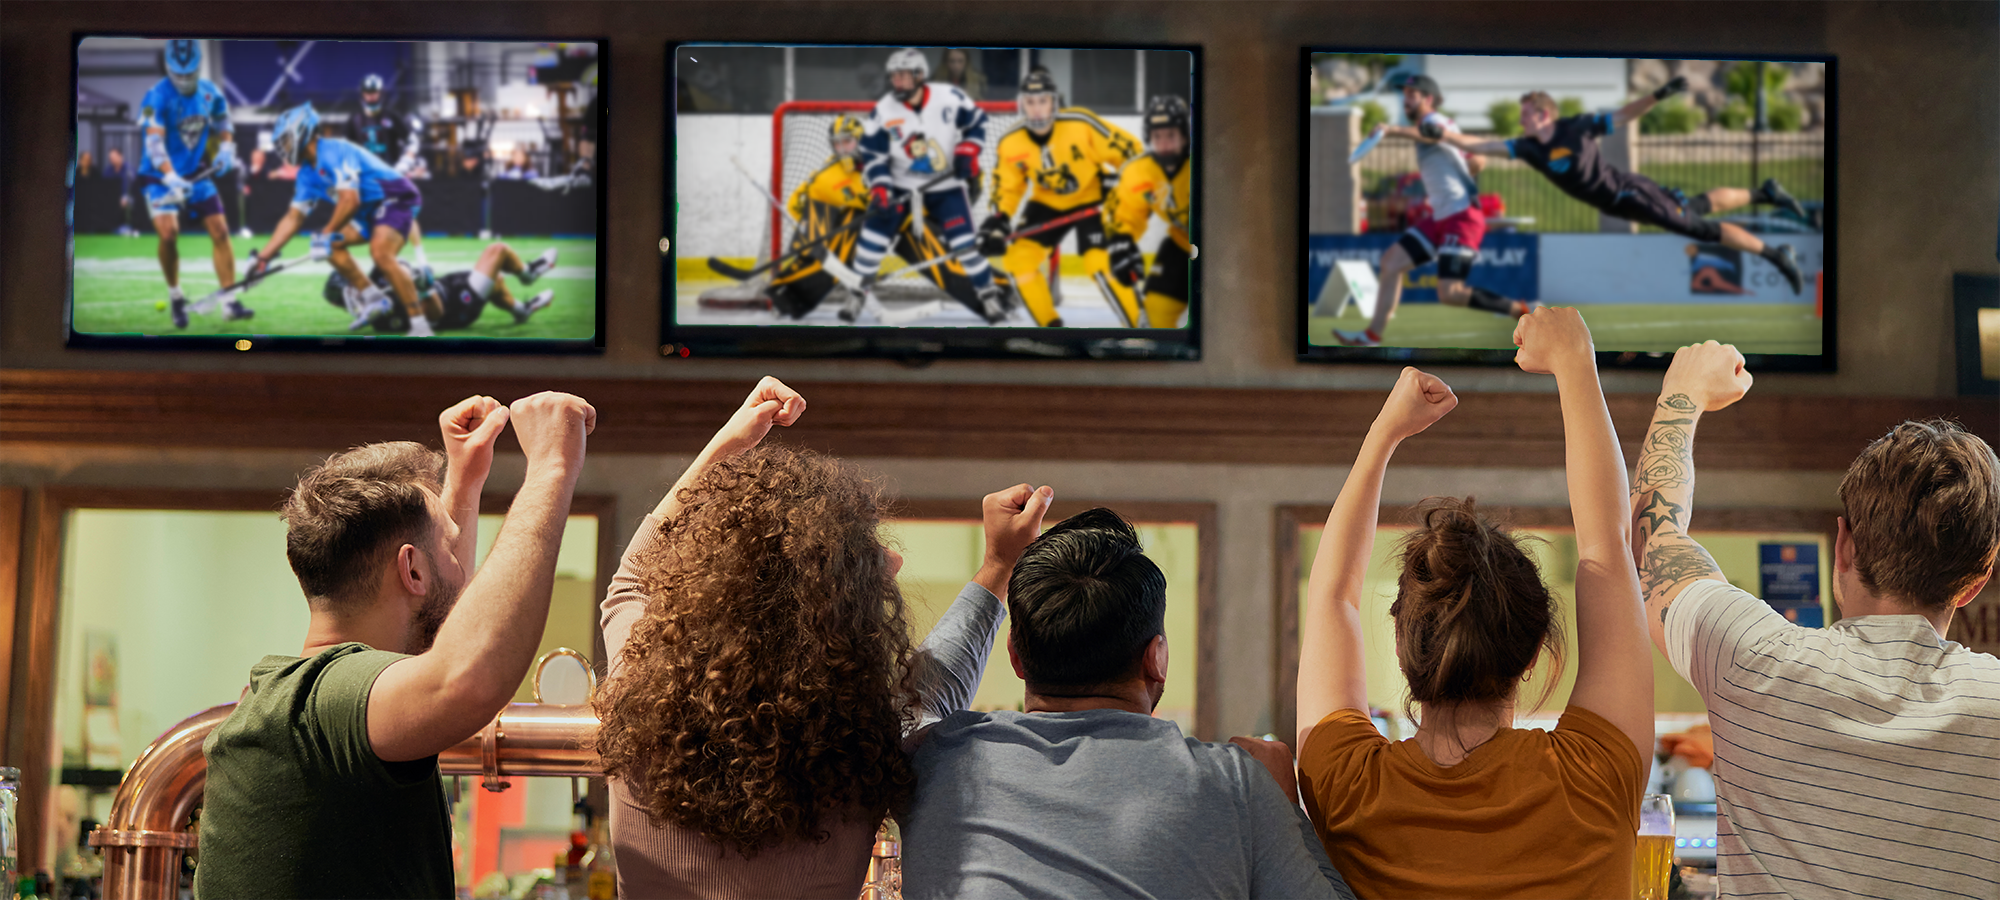 Sports fans watching professional lacrosse, professional women's hockey, and ultimate disc at a sports pub.